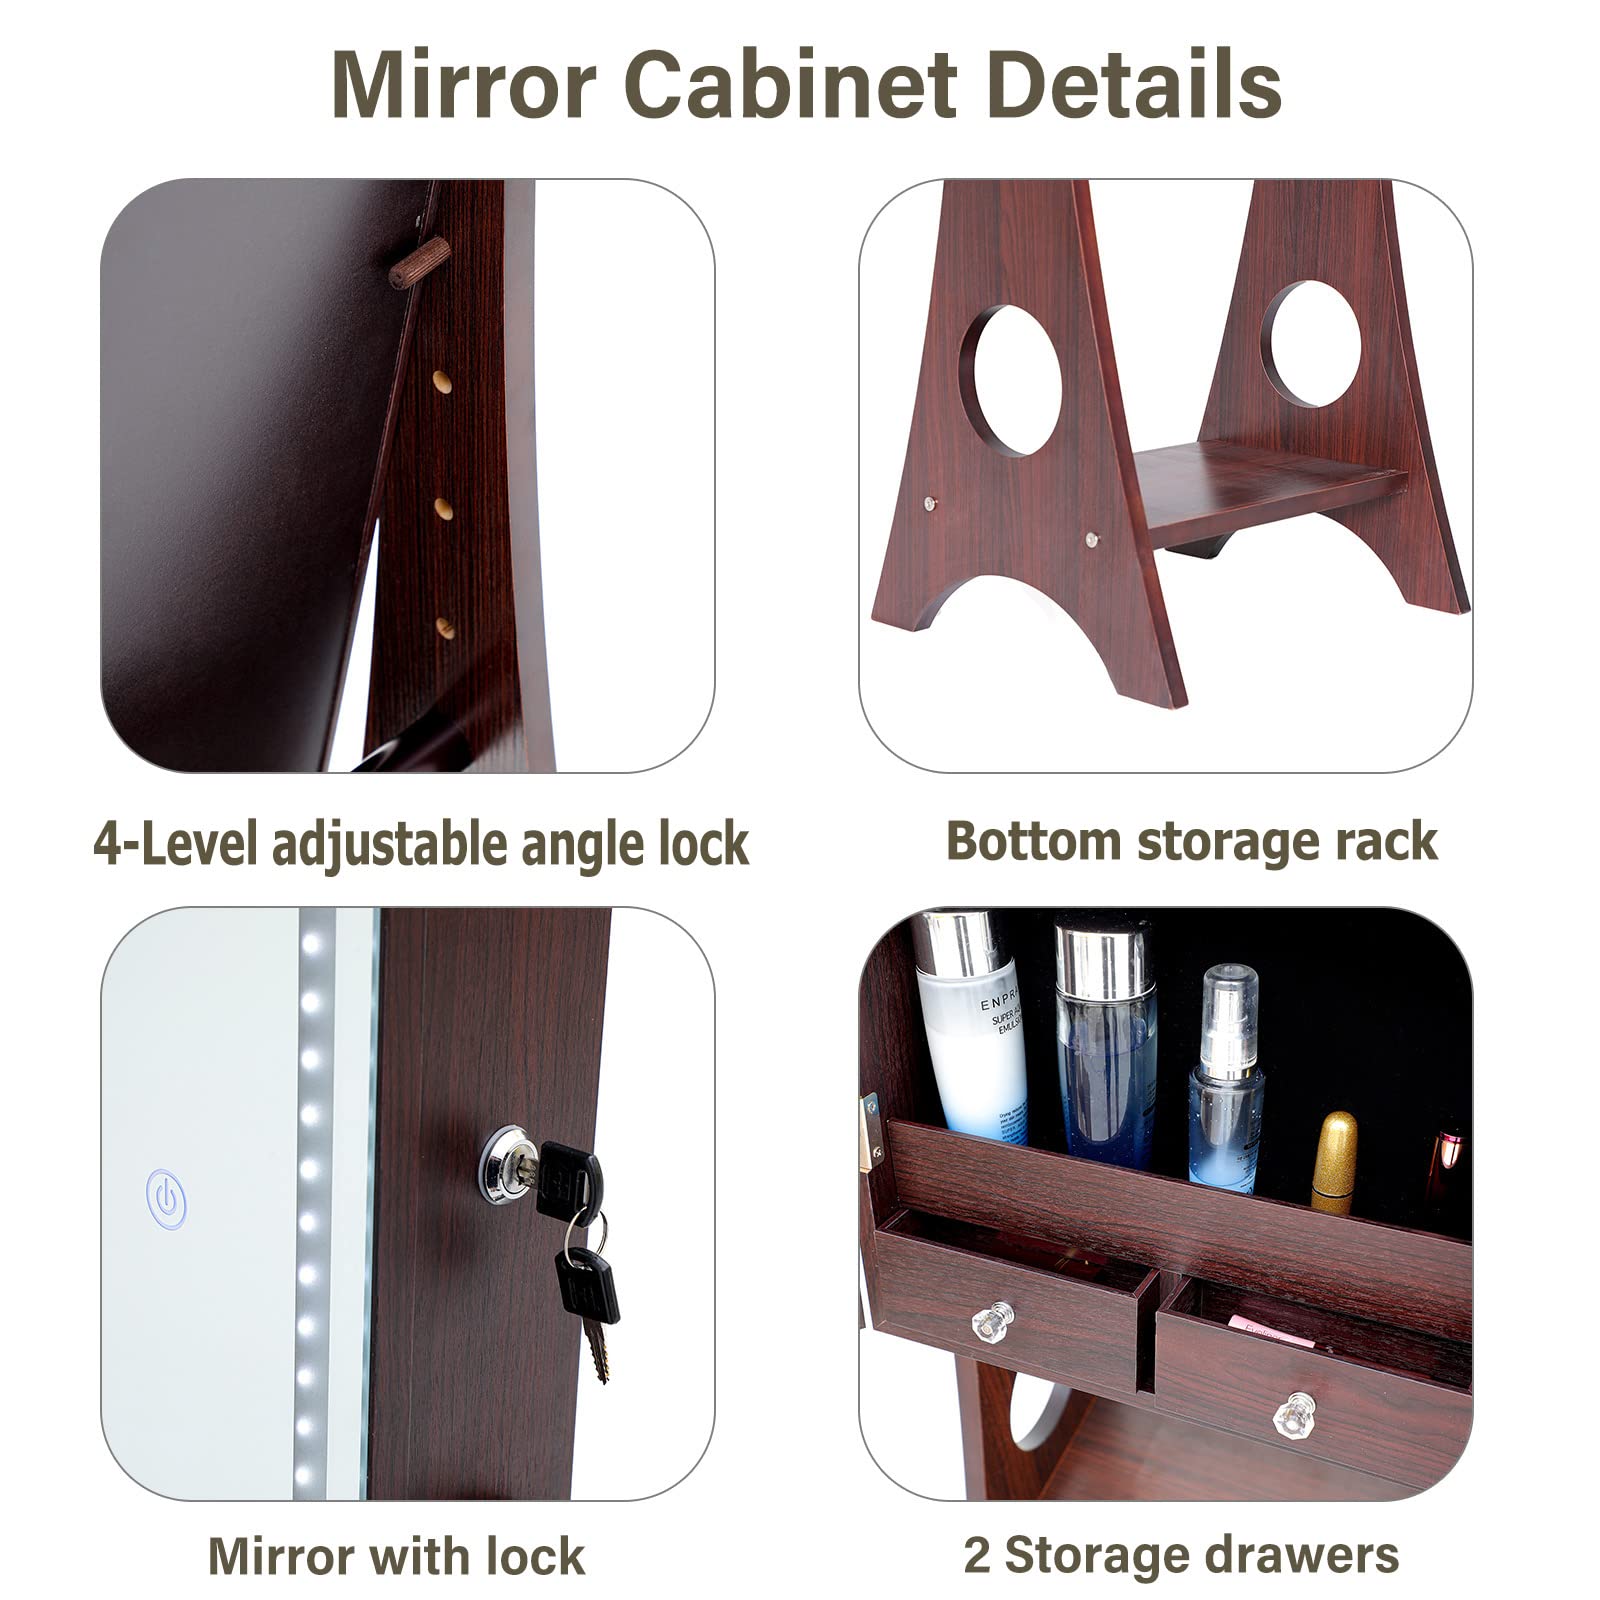 6 Led Jewelry Cabinet Mirror Standing Winered